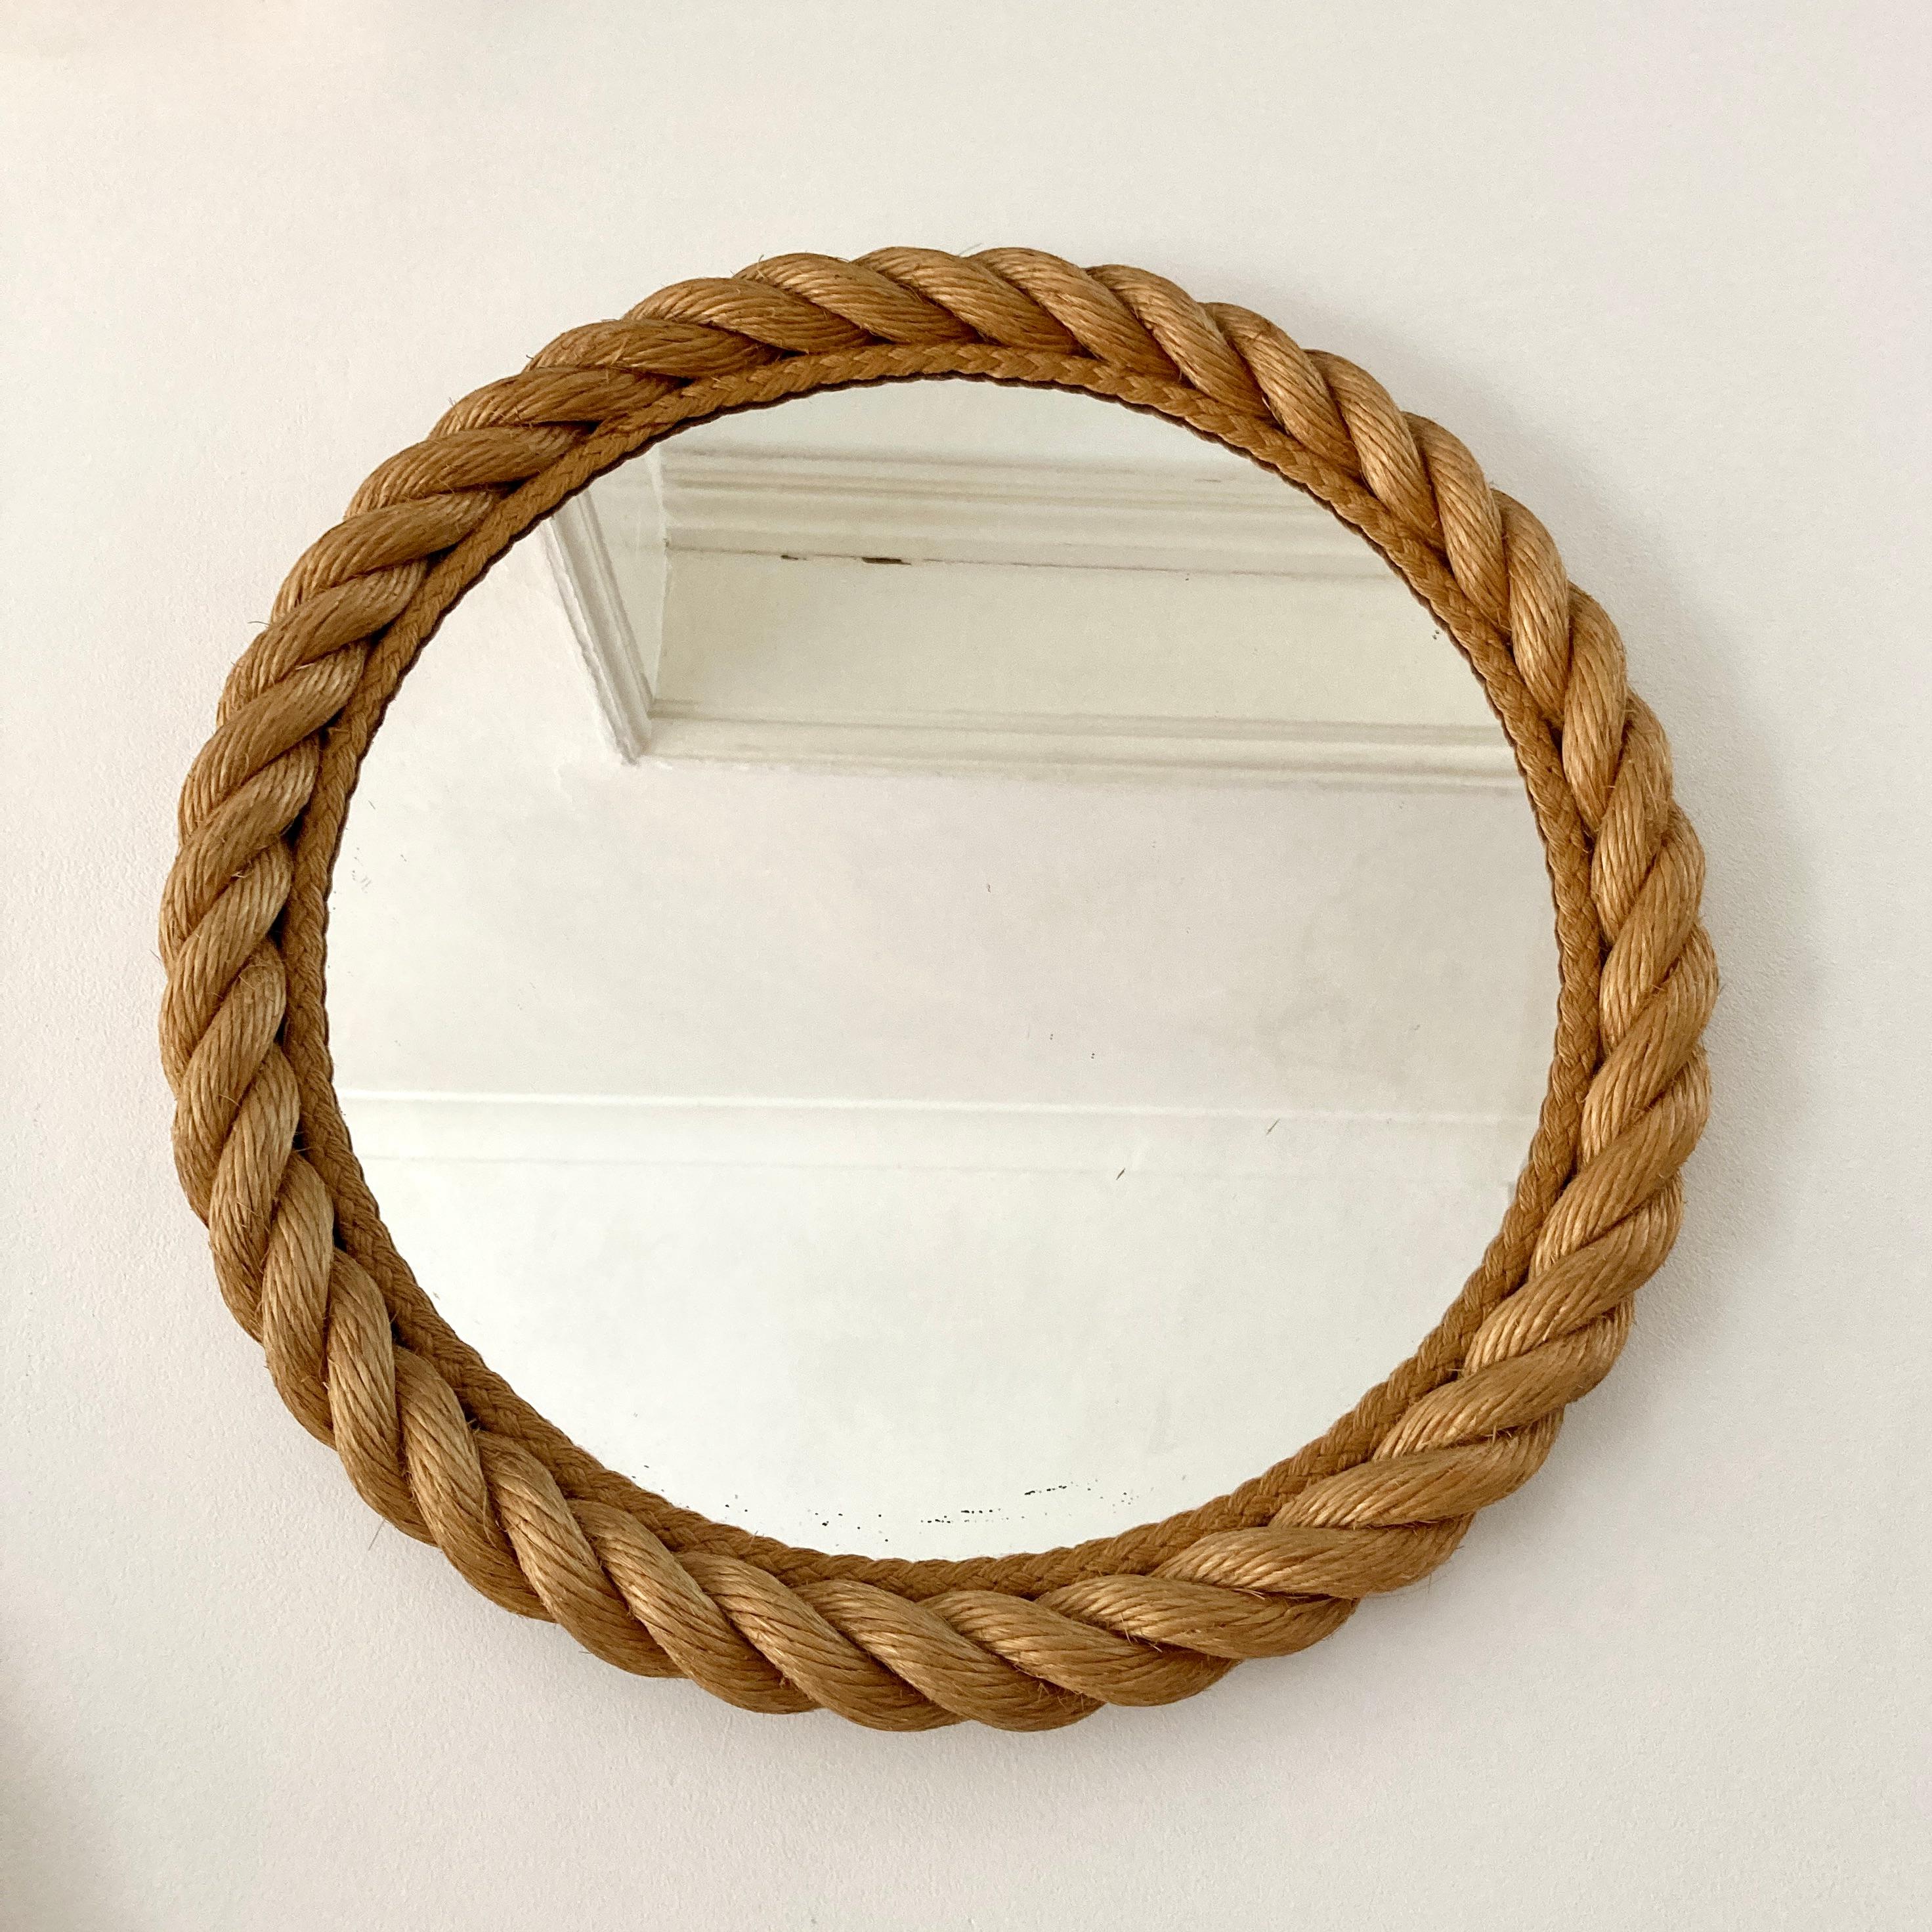 French Rope Frame Mirror, Audoux & Minet, France, 1950-1960